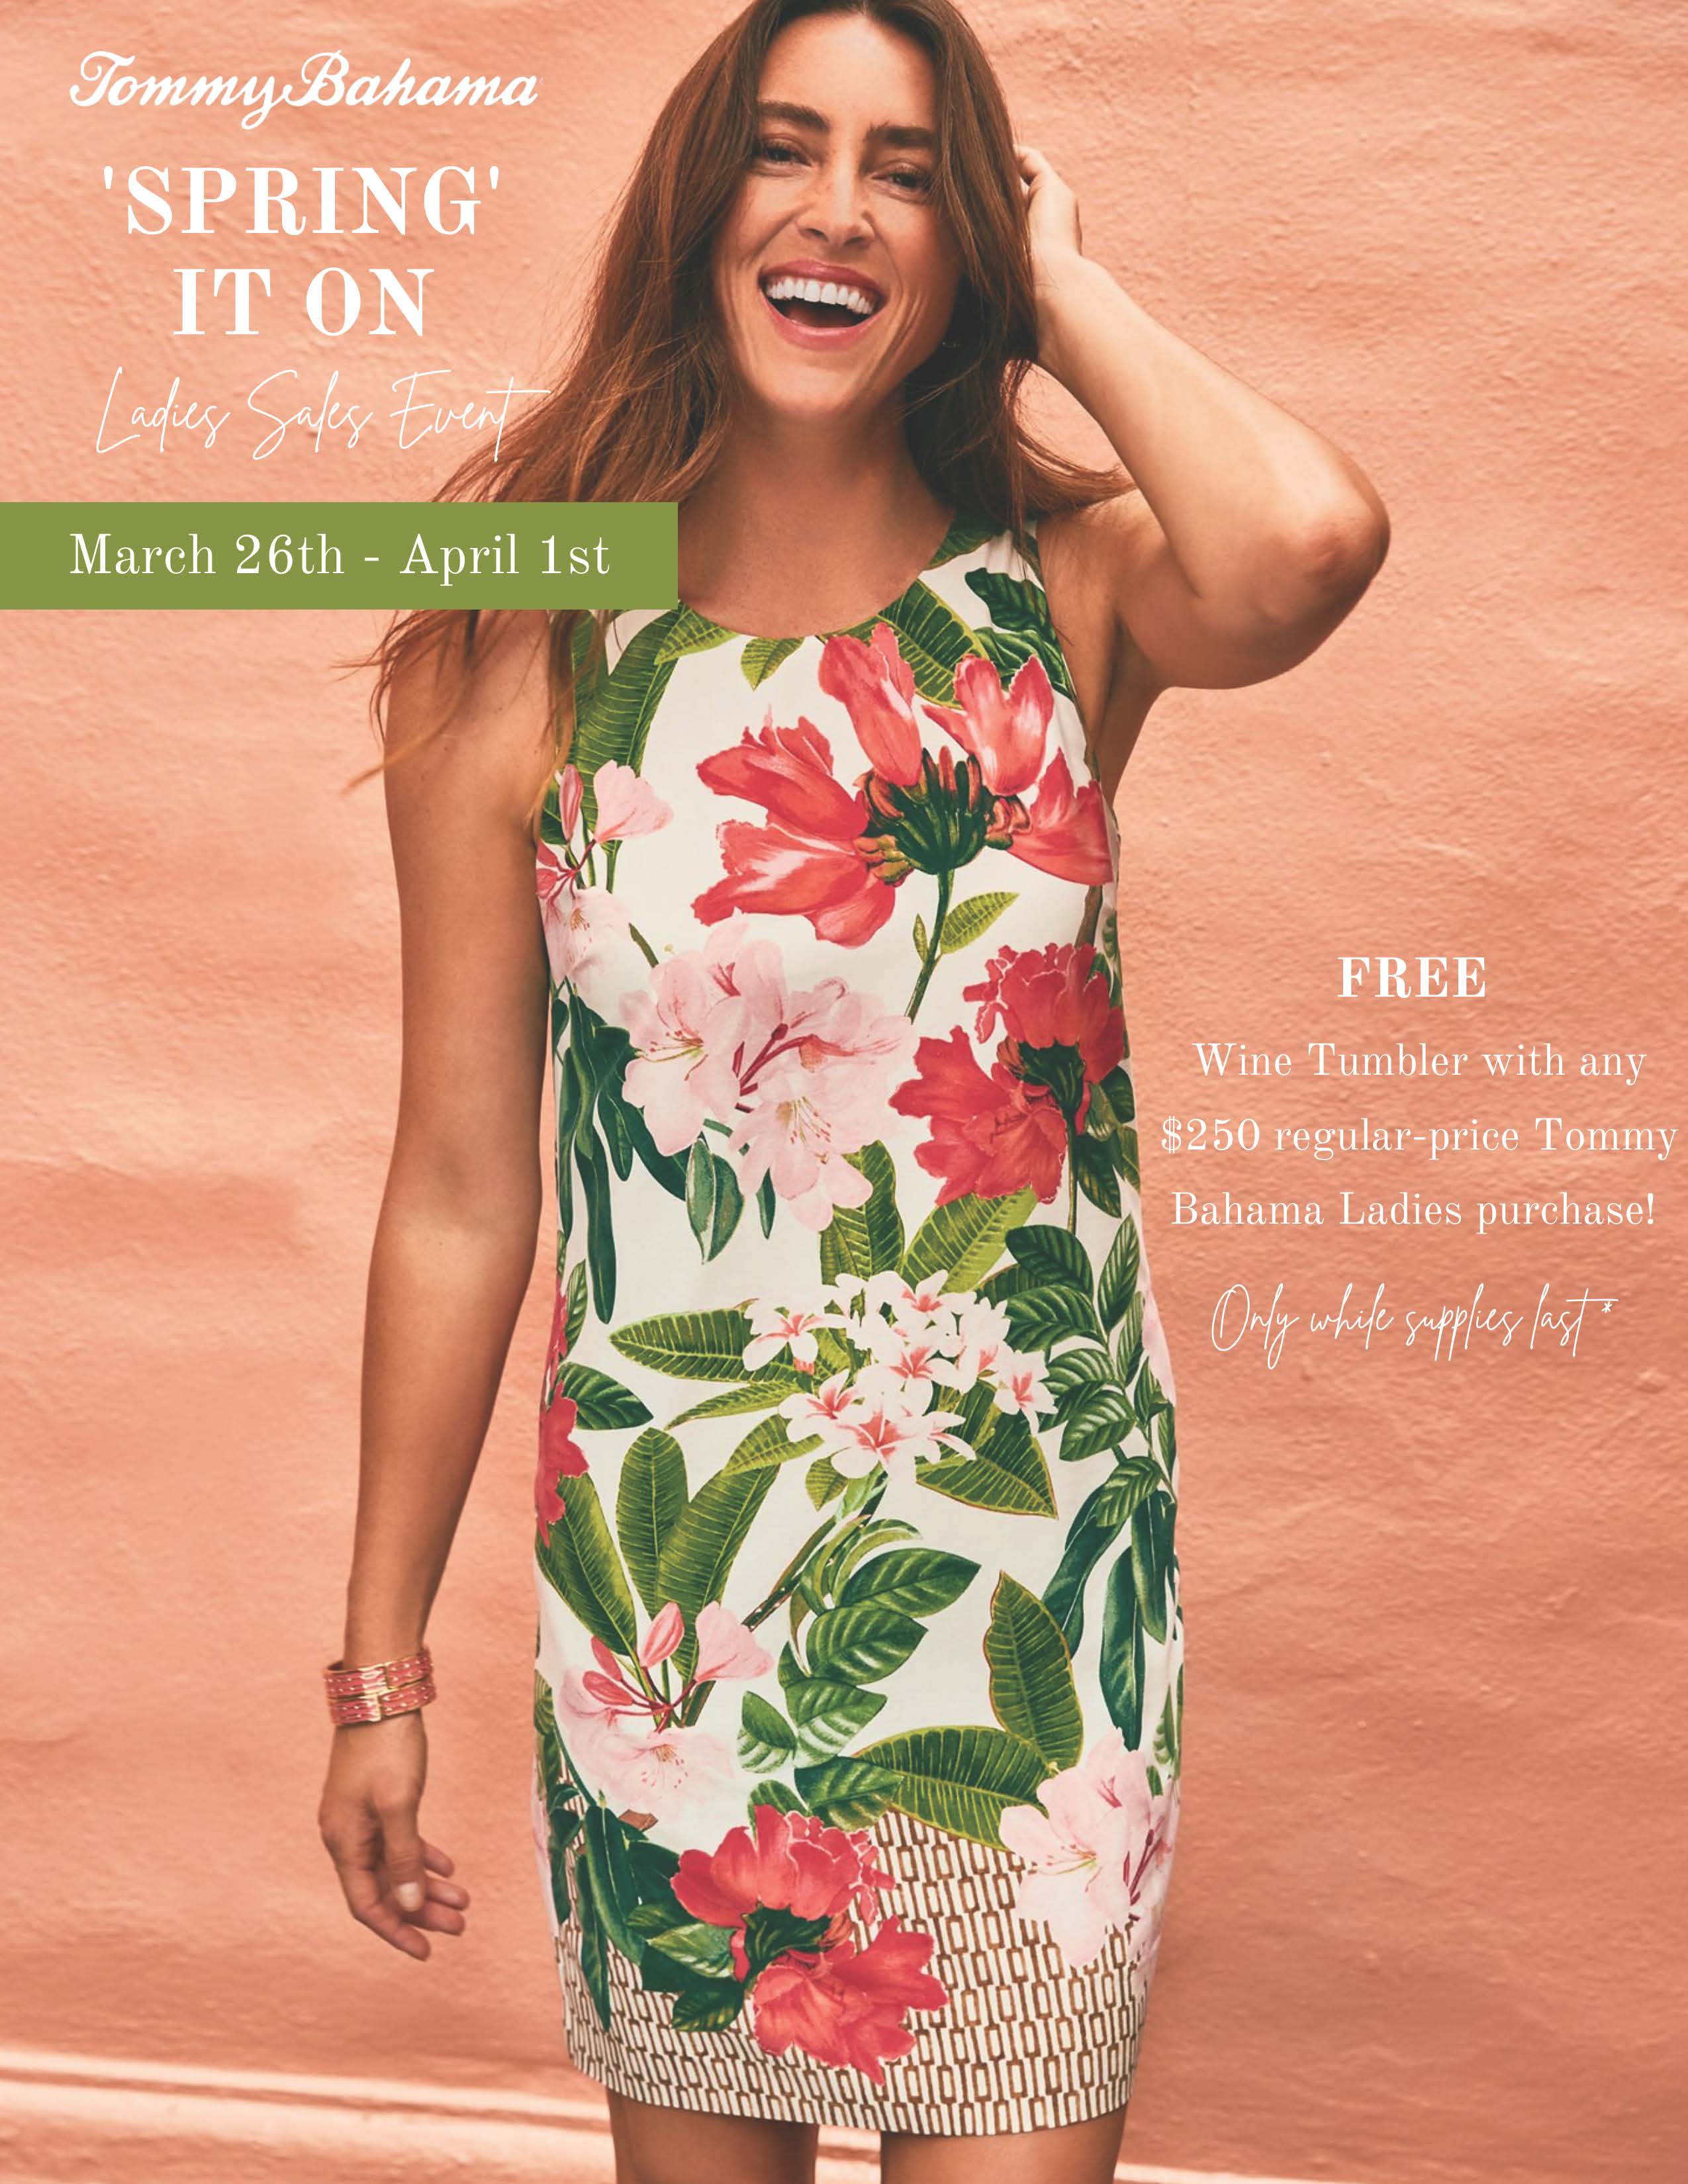 Tommy Bahama "Spring it on" from Dillard's